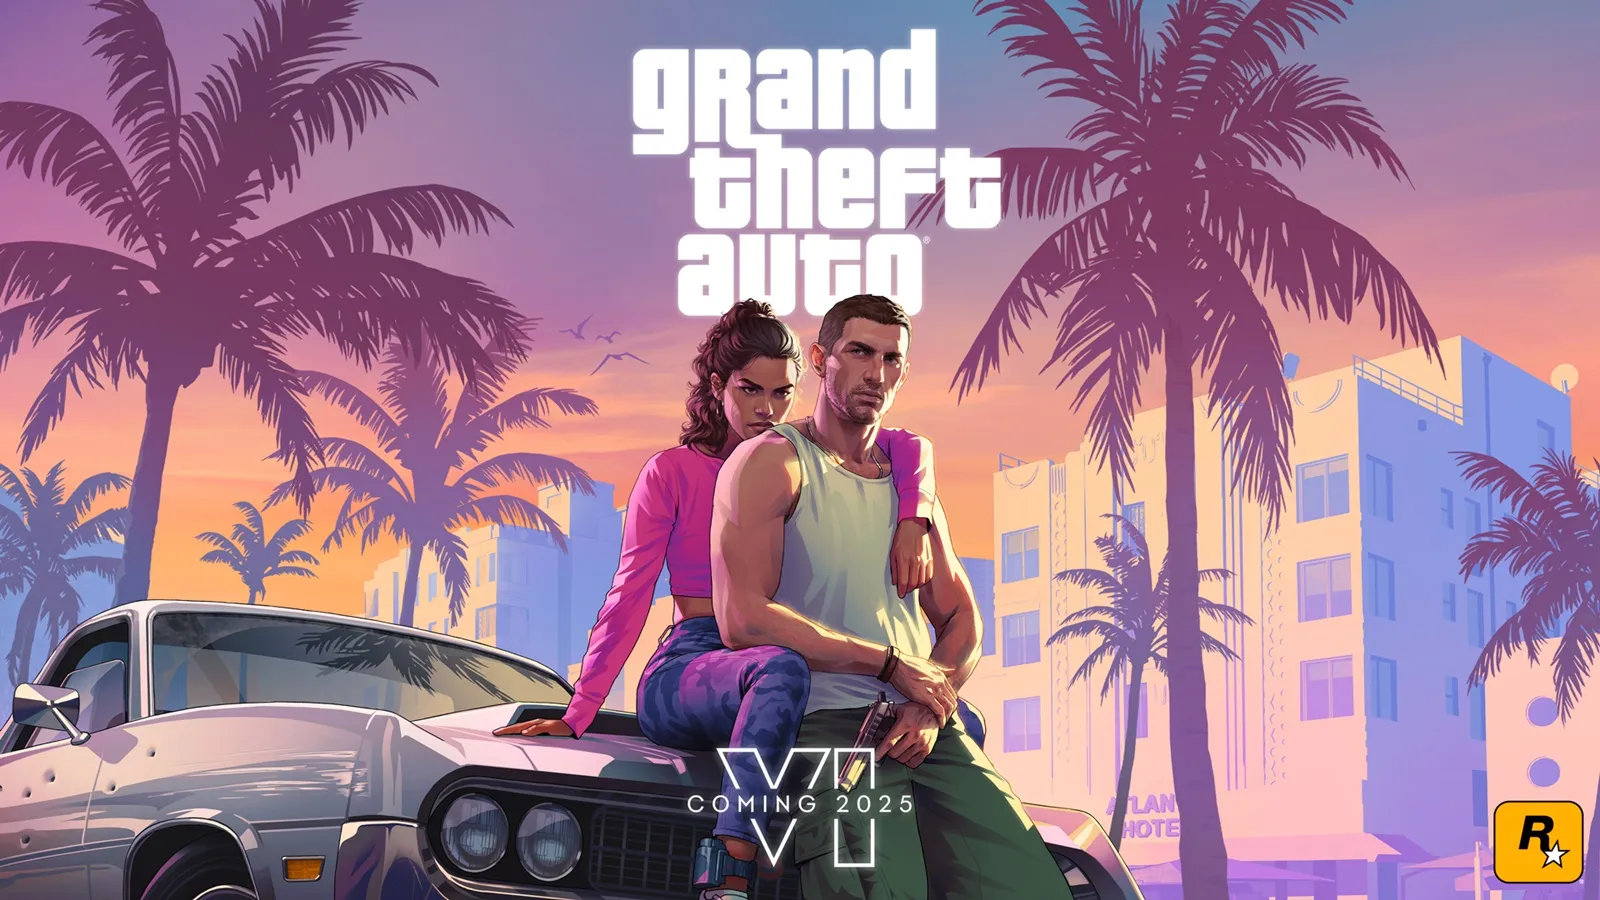 Grand Theft Auto 6 first trailer is here, and it’s coming out in 2025